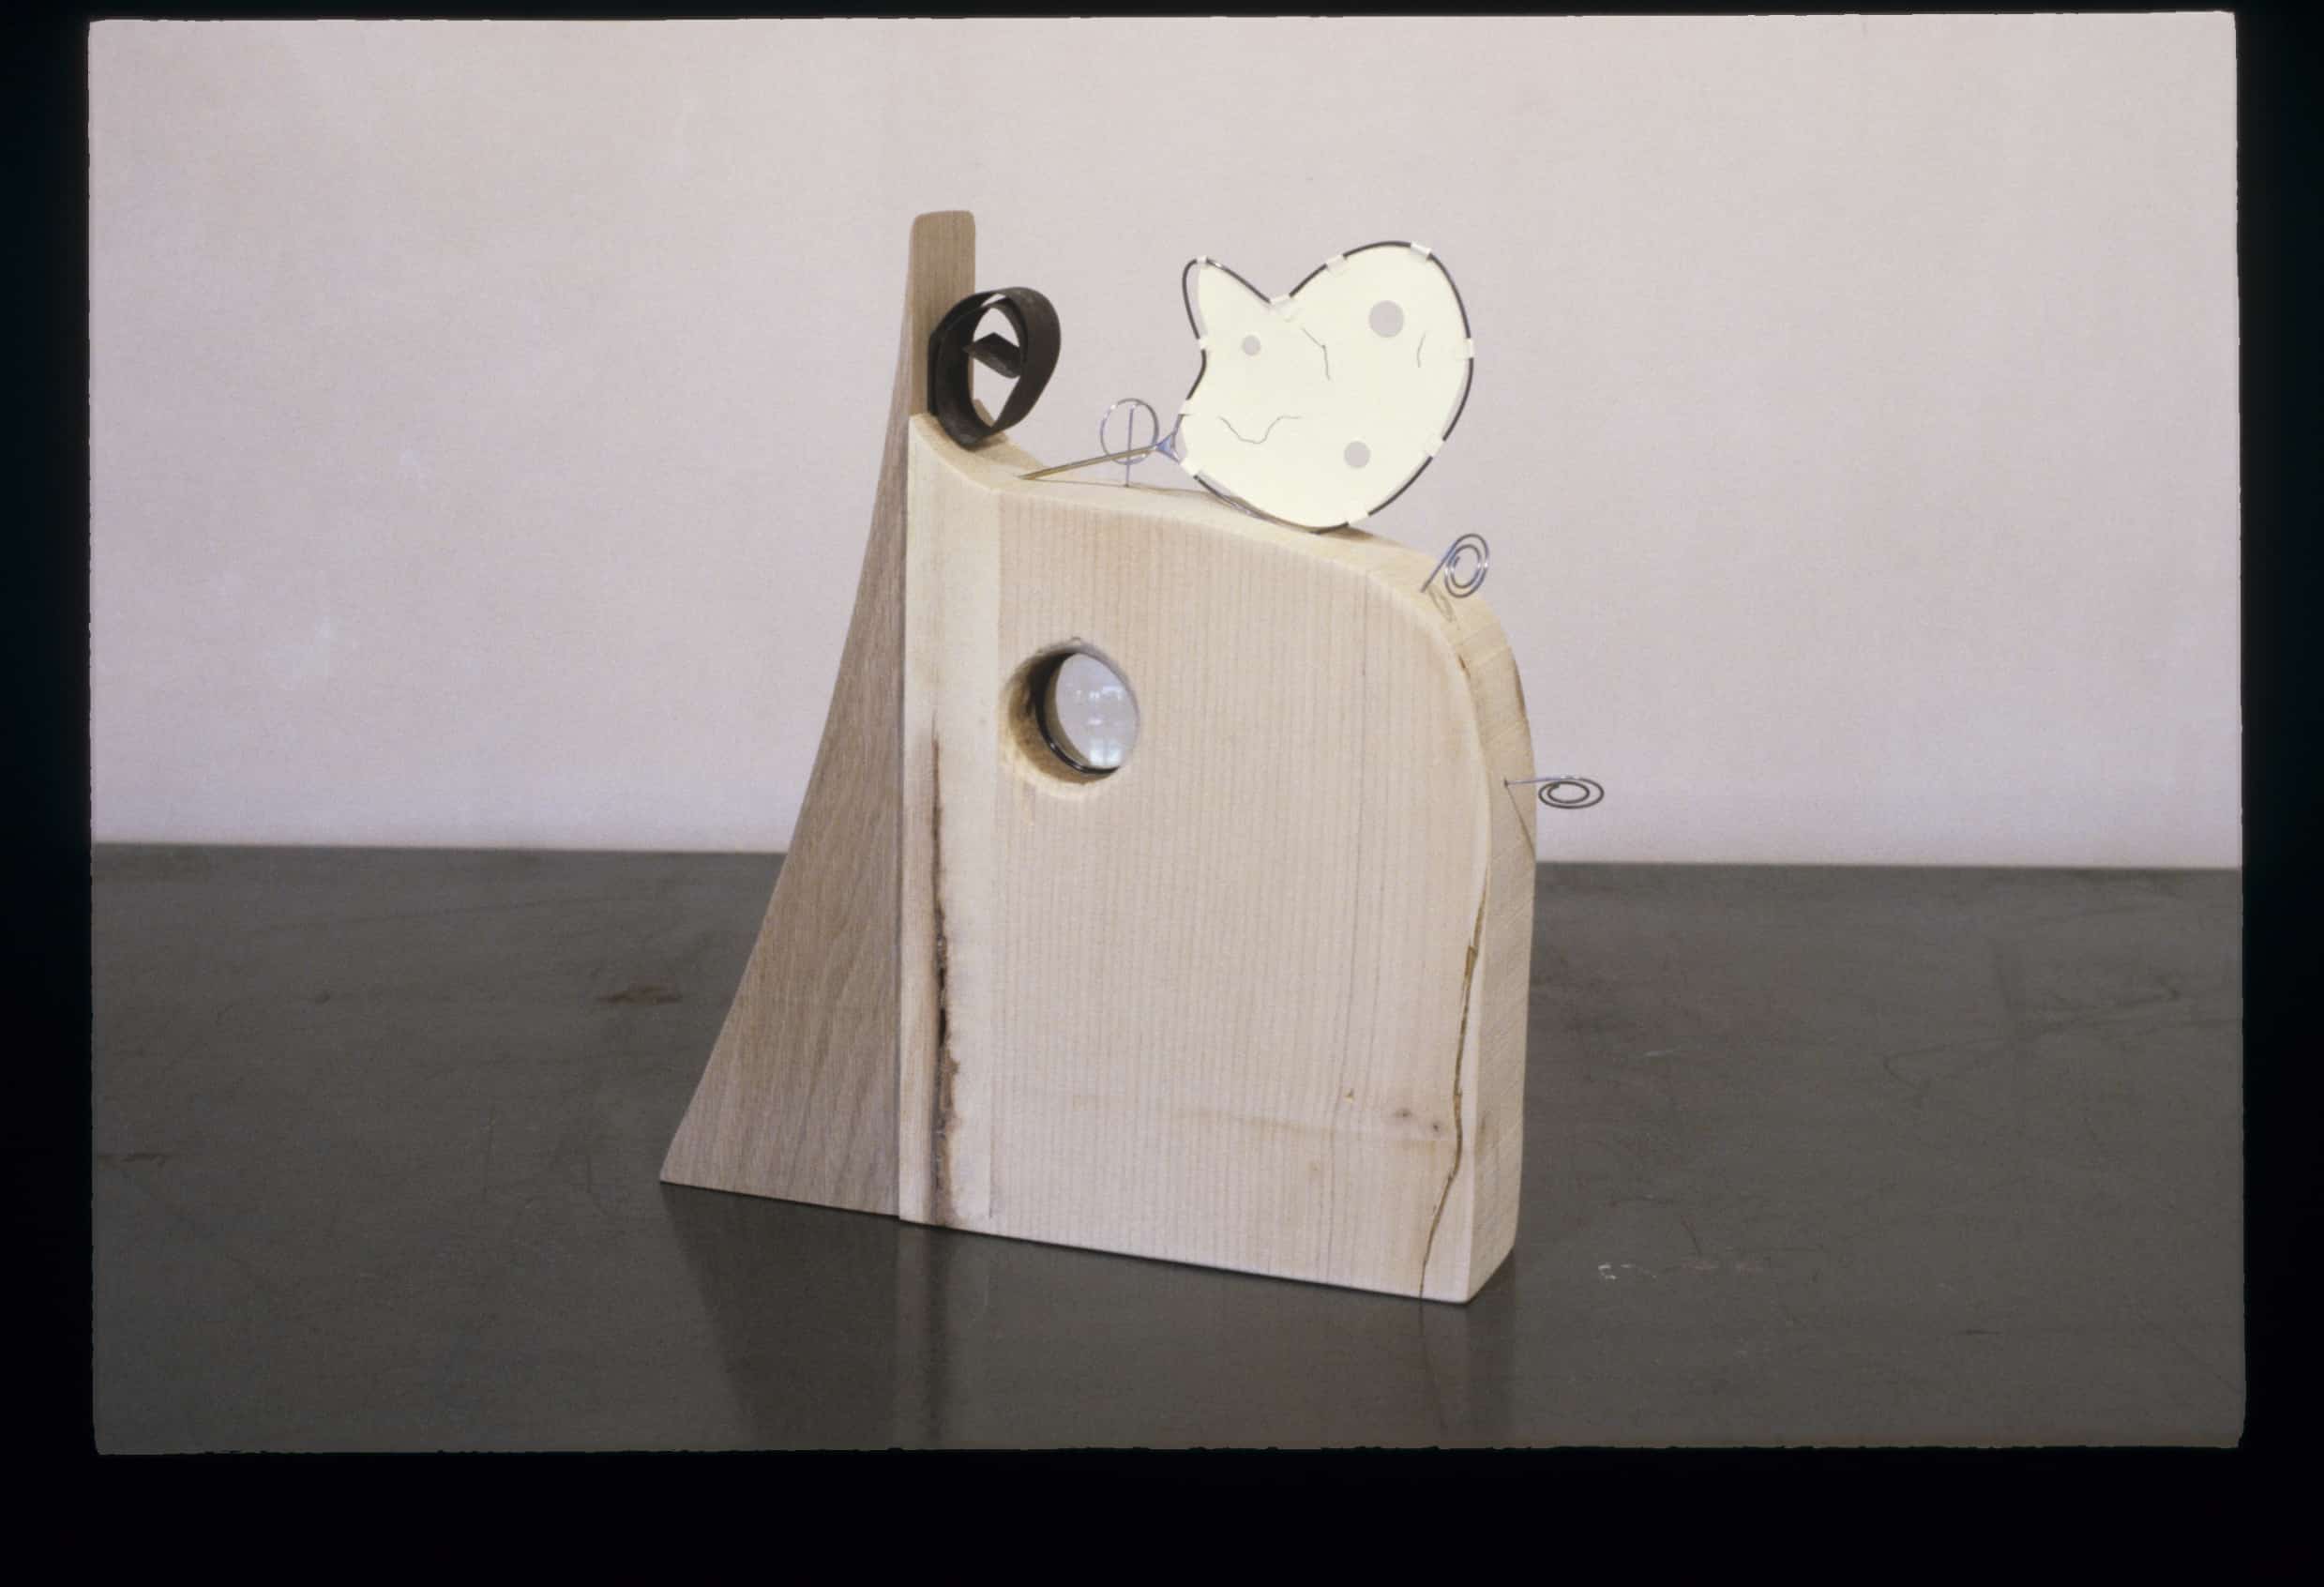 "The Poetics of Choice" 1990, Wood, Glass, Metal, Drawing on Paper, 16"H x 14"W x 3"D